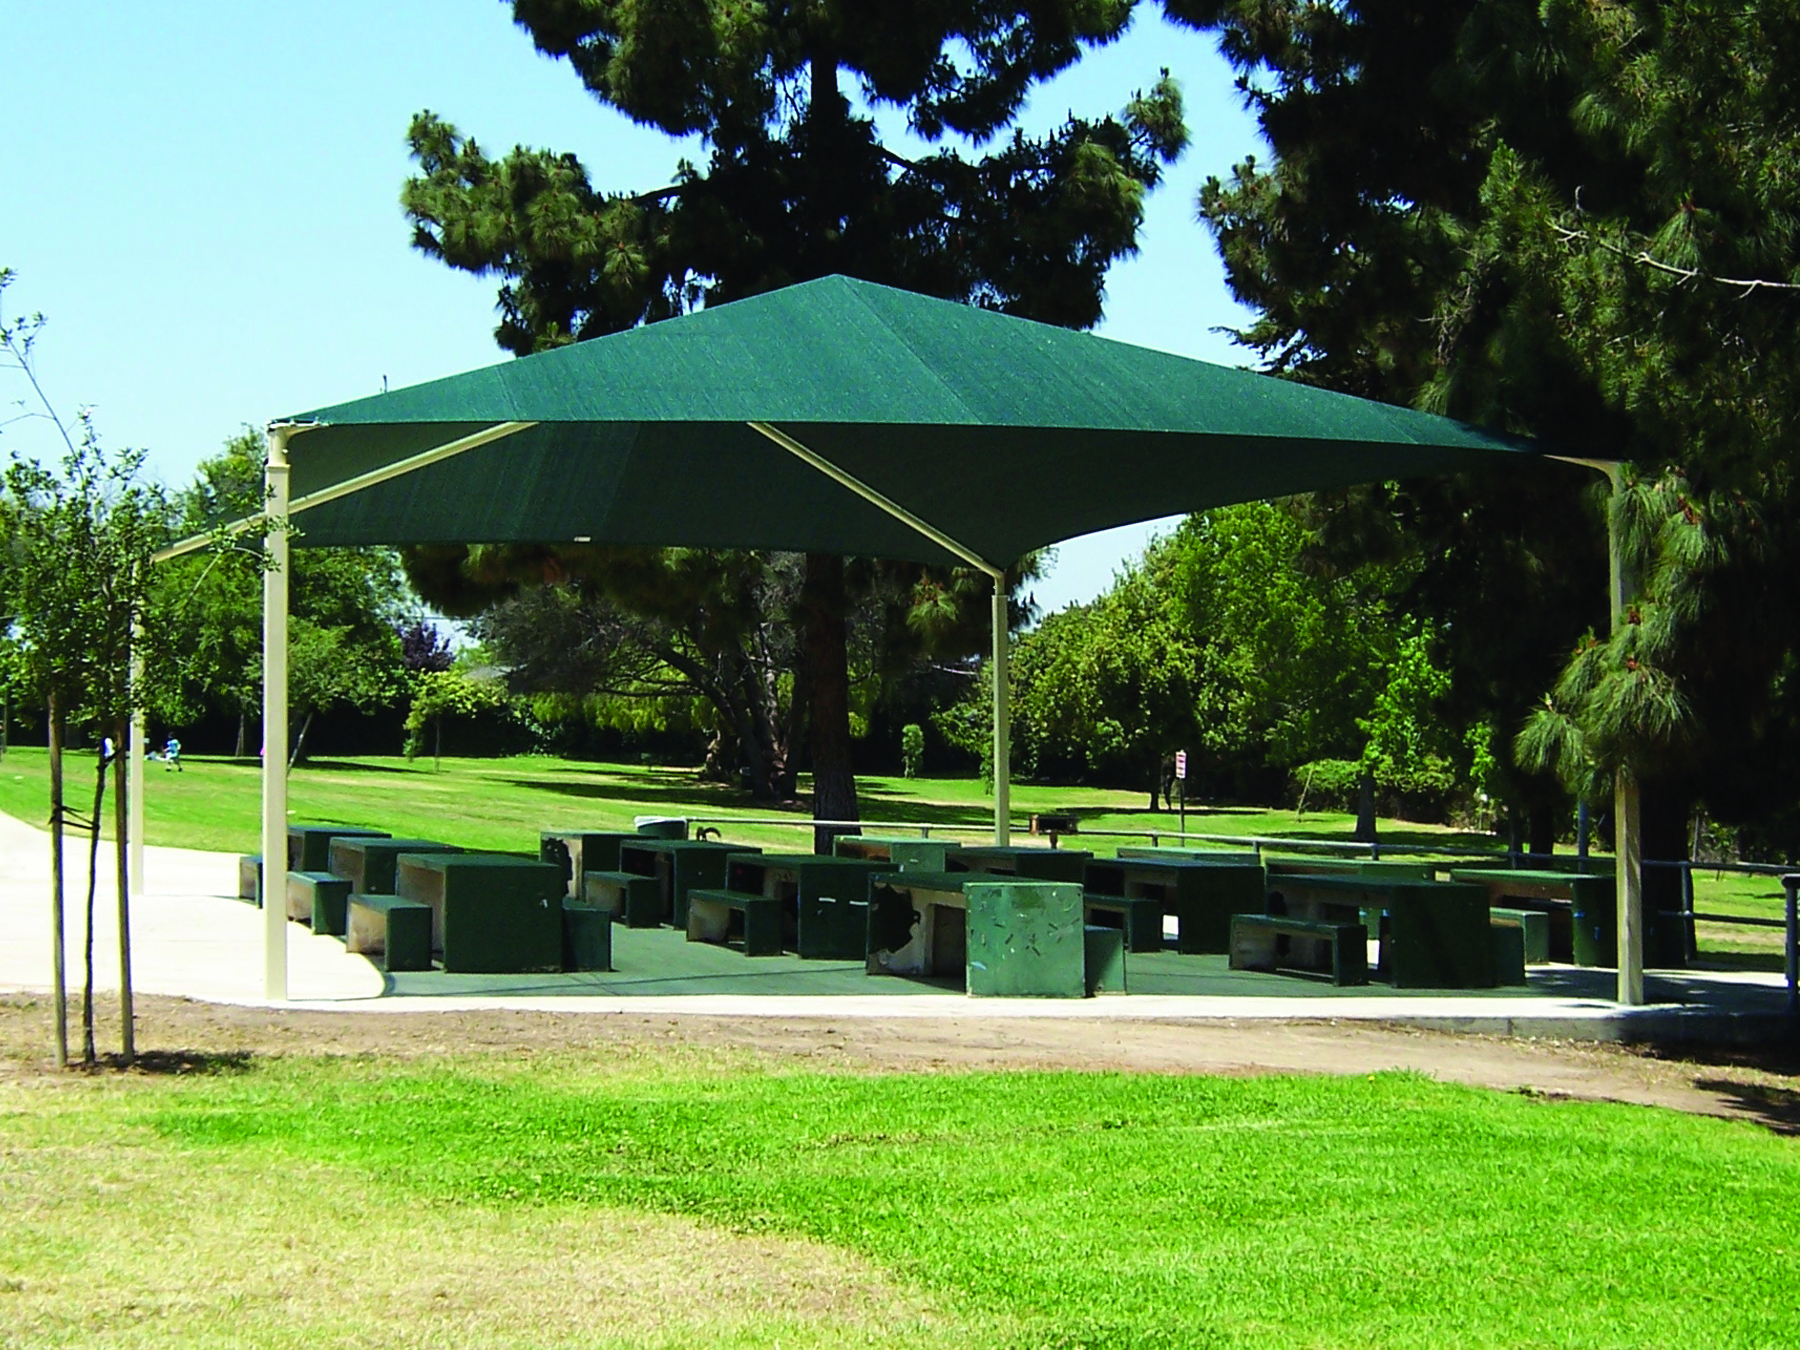 sun shade covering outdoor seating in park